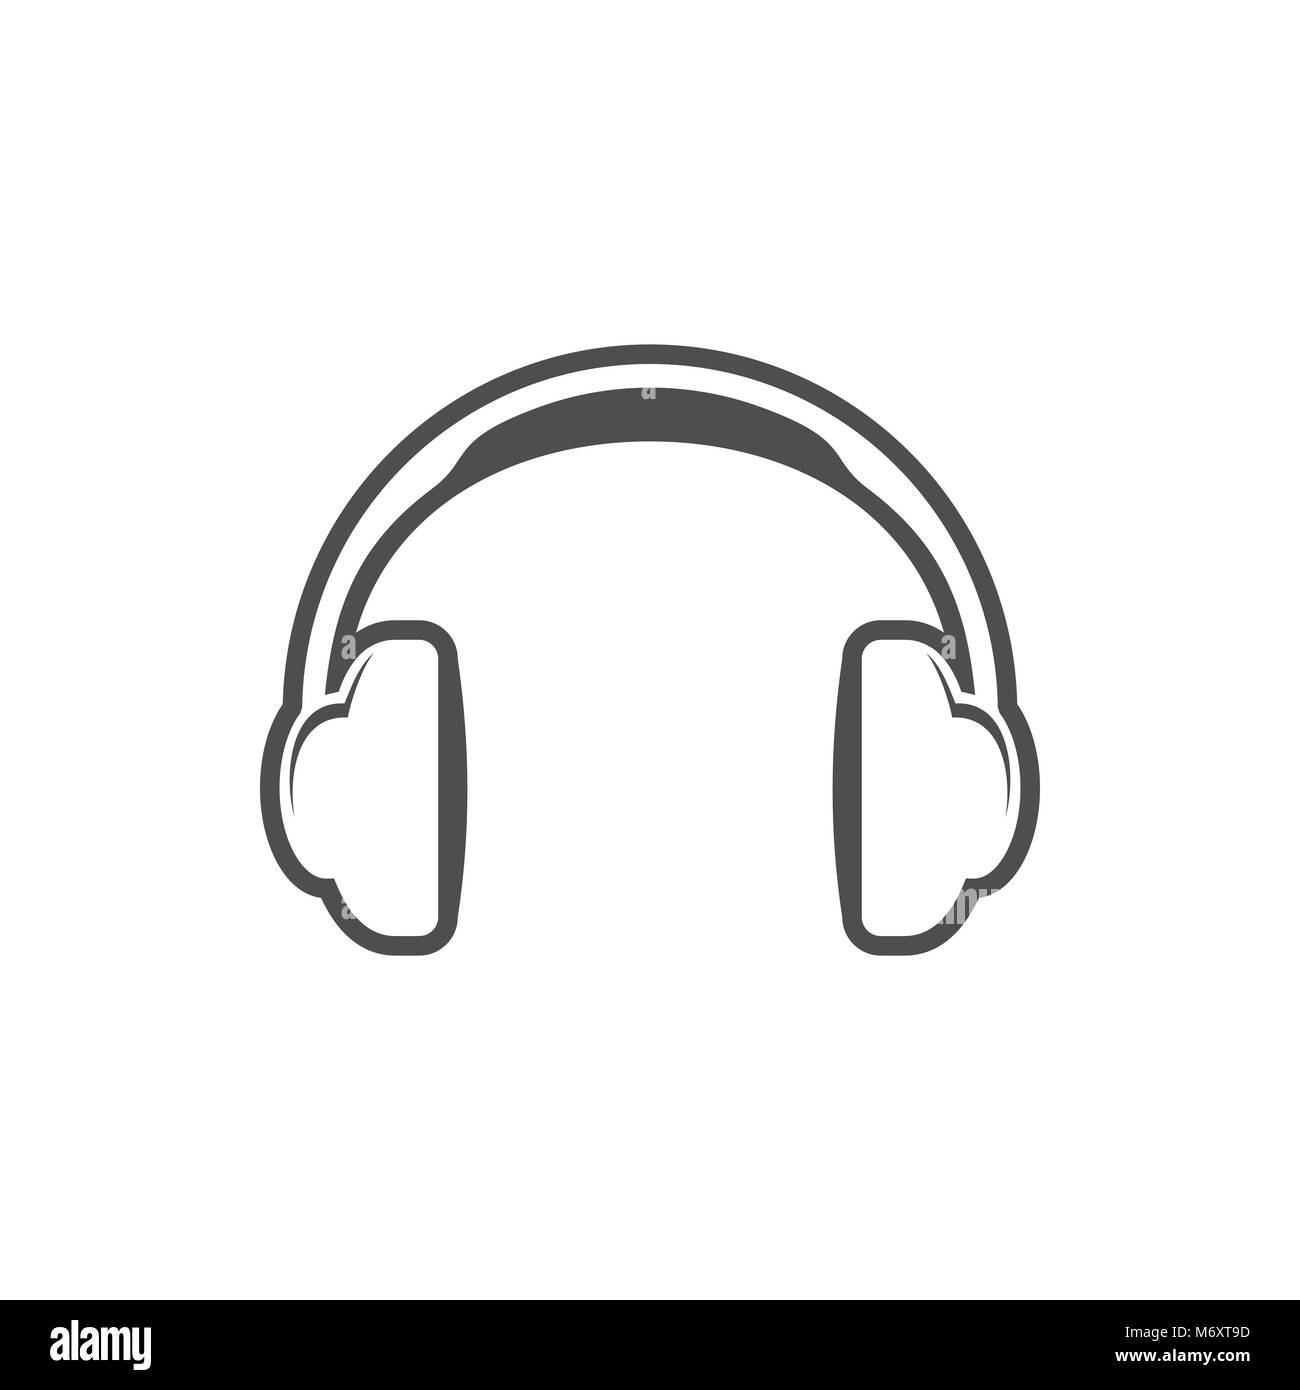 Headphone graphic Black and White Stock Photos & Images - Alamy